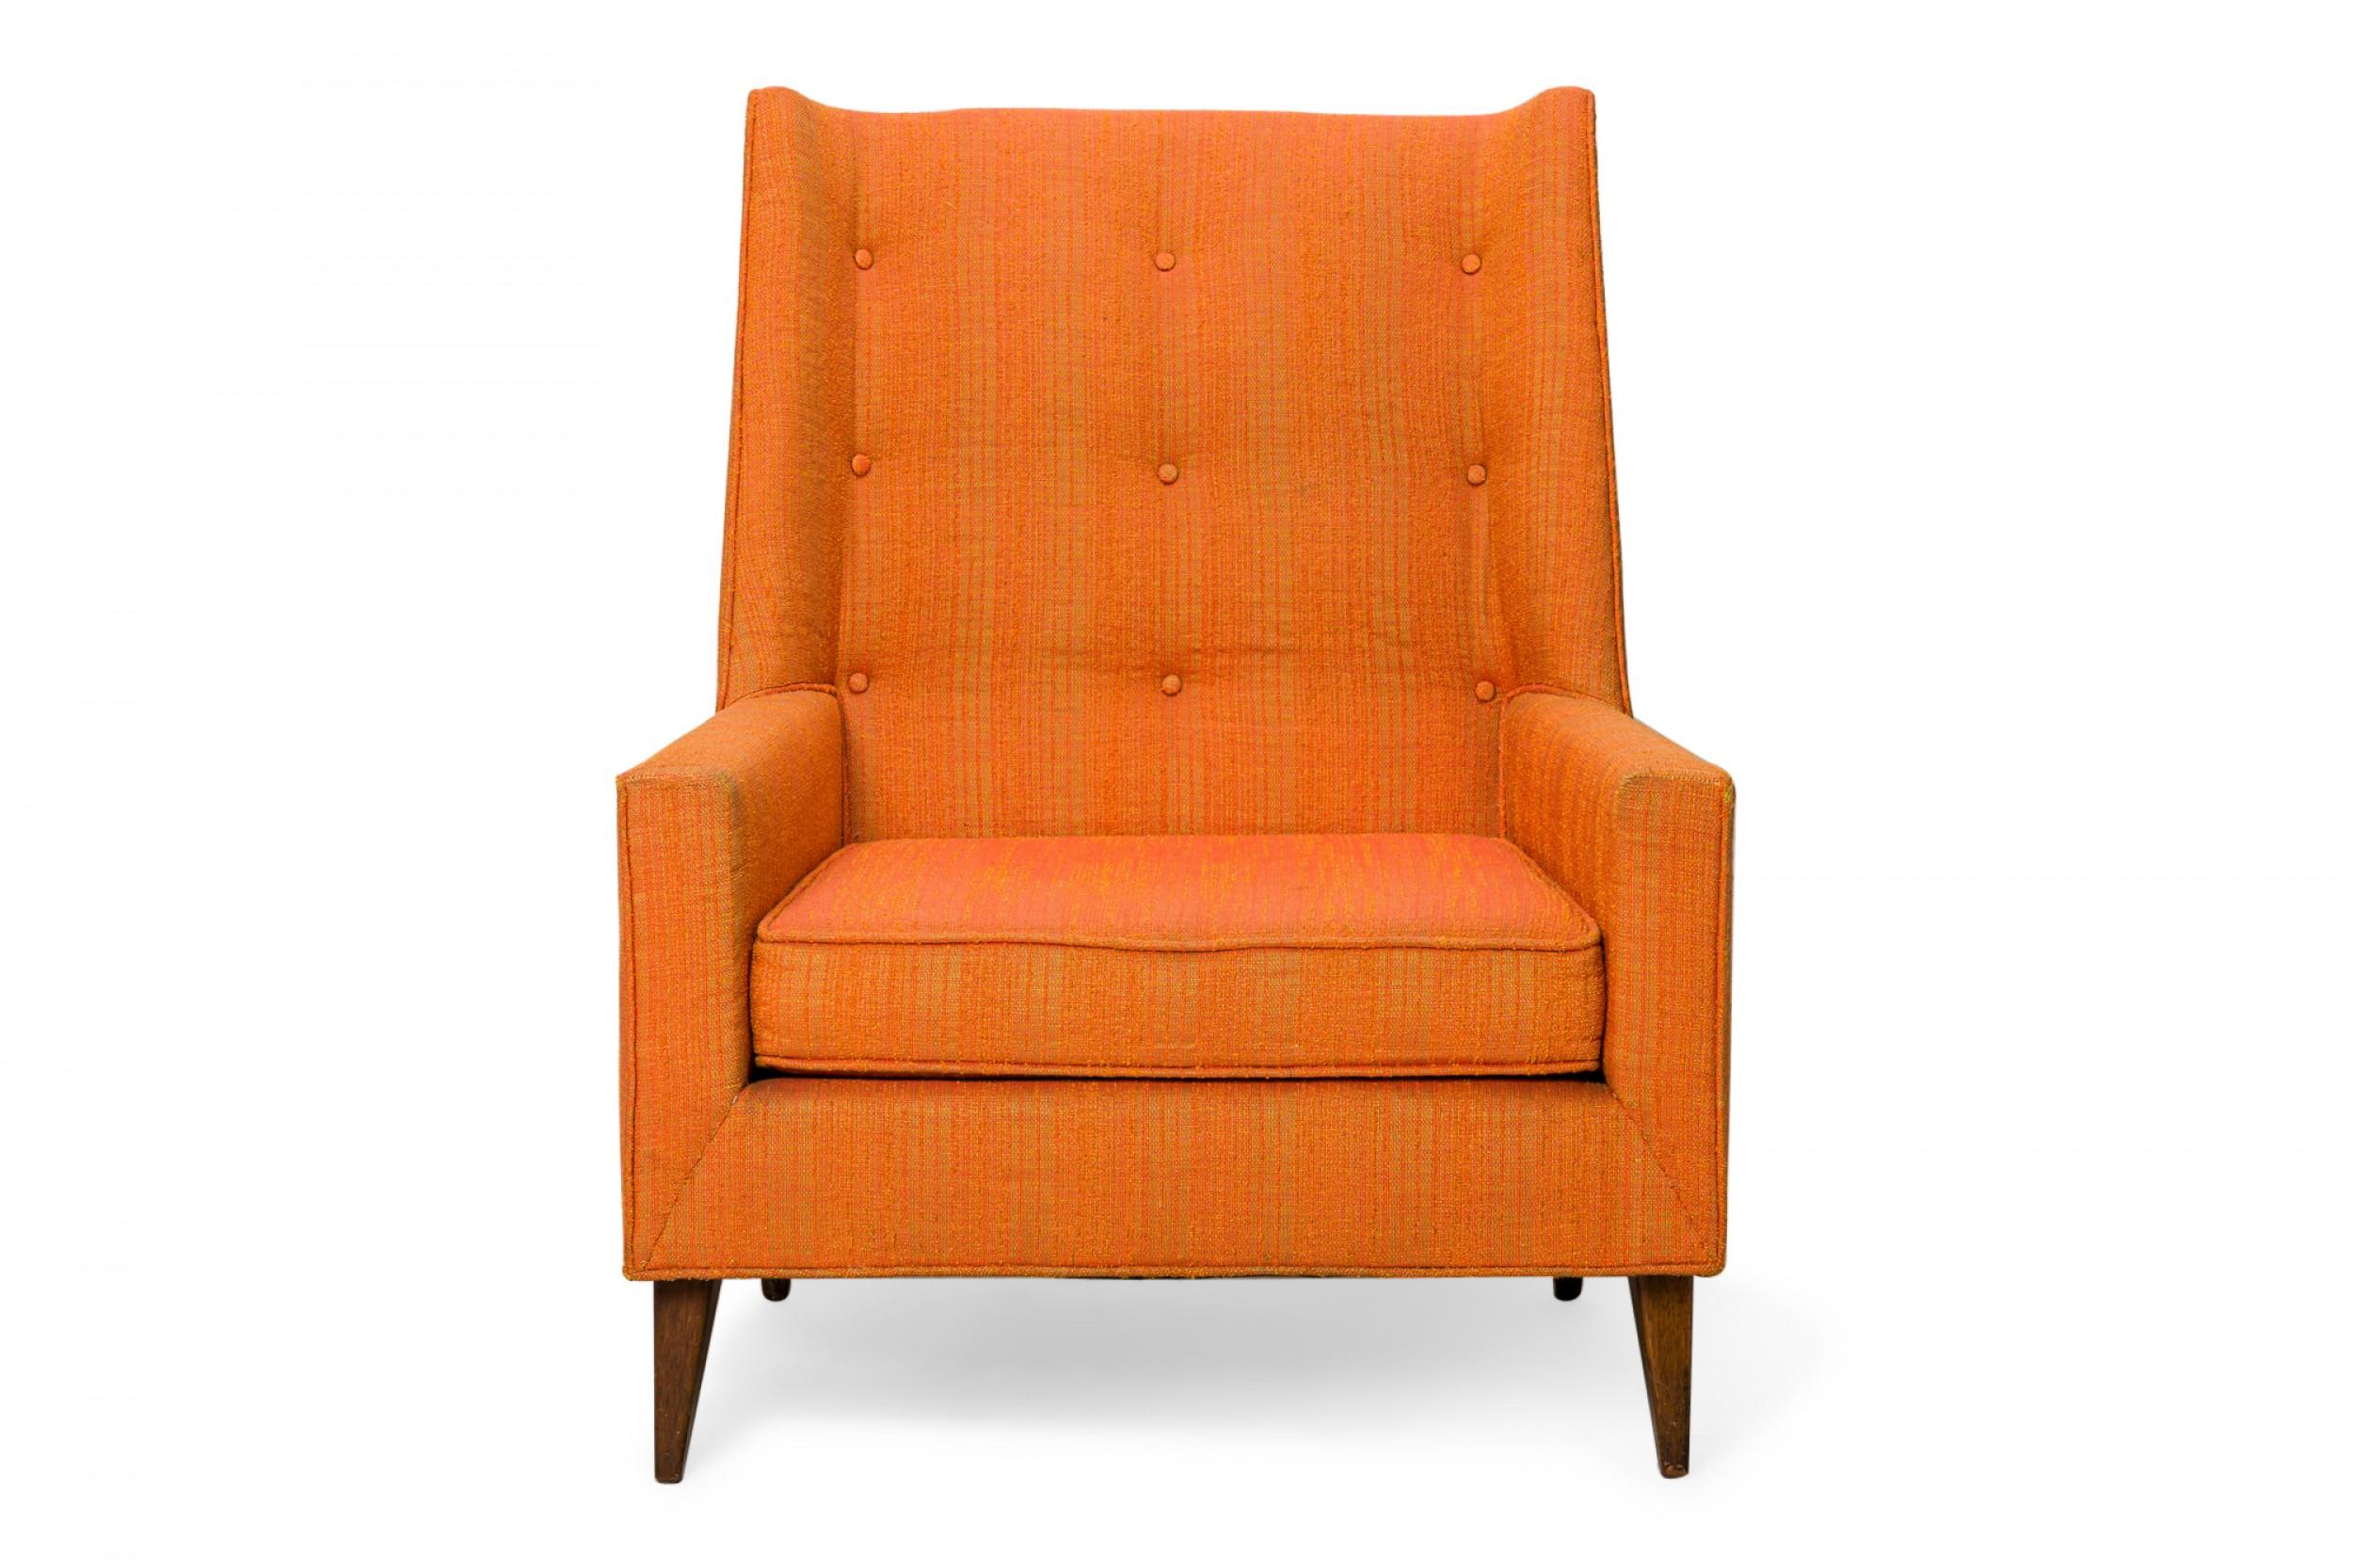 American mid-century arm / lounge chair with a tall back and button tufted textured orange upholstery, resting on four tapered wooden legs. (HARVEY PROBBER)
 